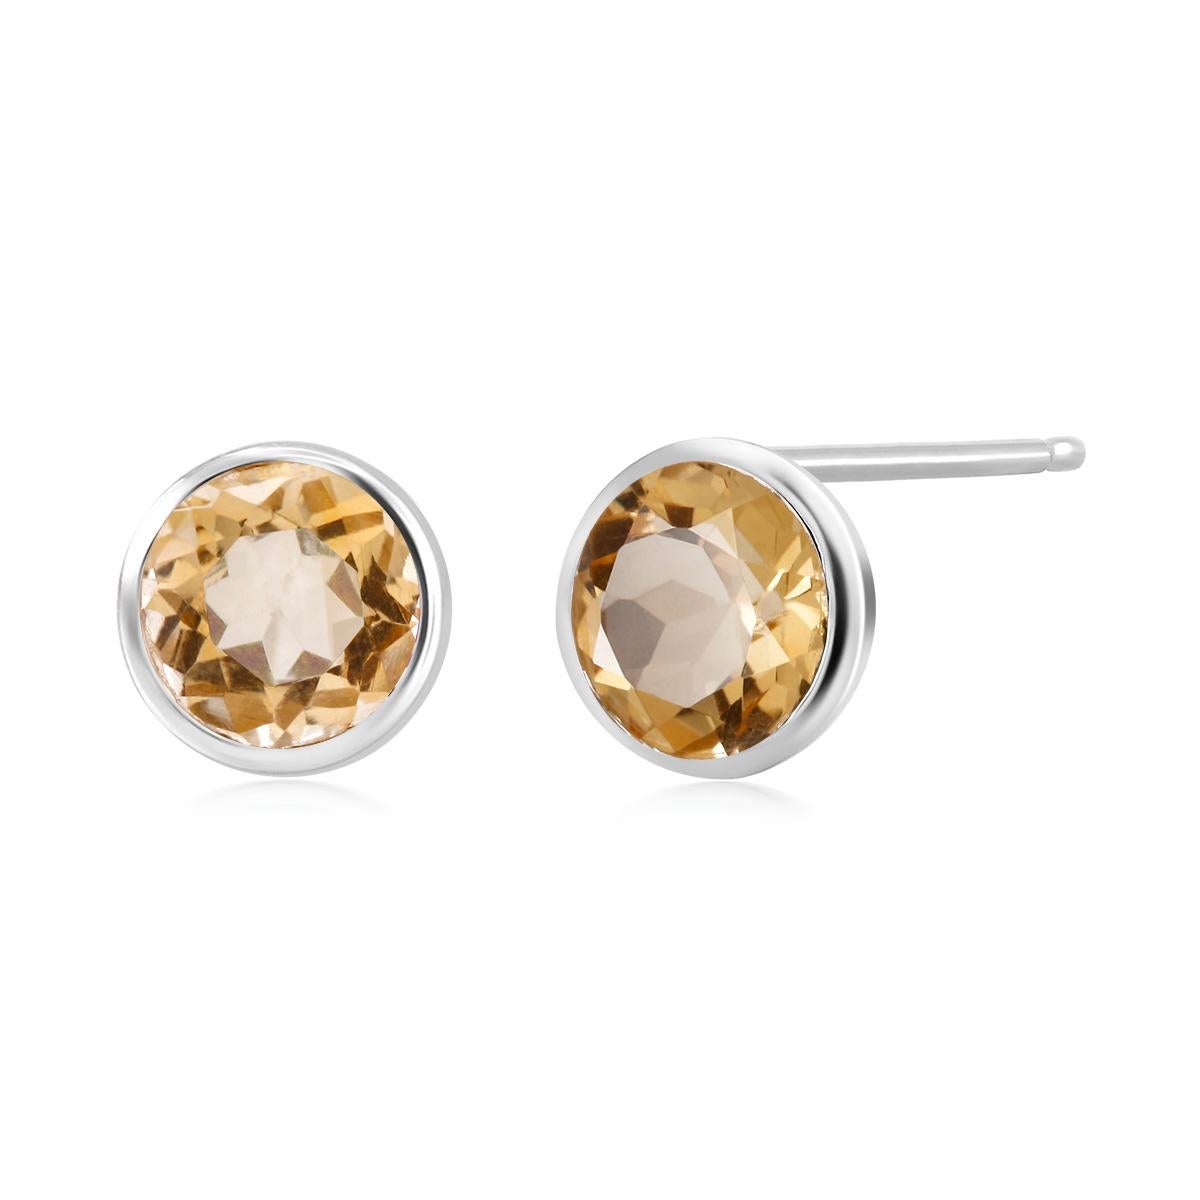 Sterling silver stud earrings
Two perfectly matched round yellow citrine weighing  6.00 carats
Earrings measuring  0.30 inch
Round blue topaz measuring 7 millimeter
New earrings
Handmade in the USA
